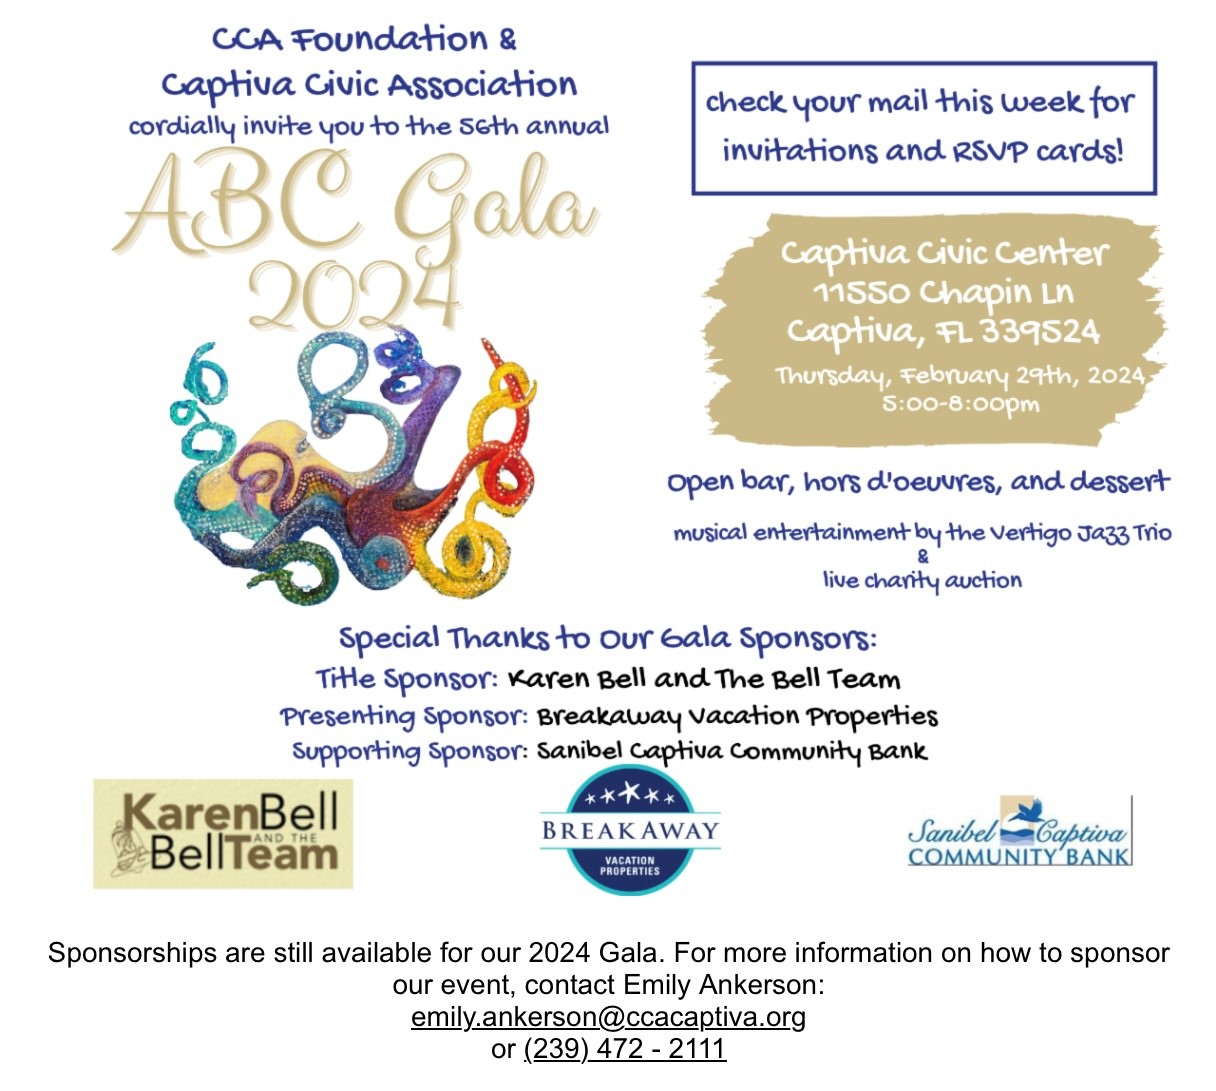 CAPTIVA CIVIC ASSOCIATION PRESENTS THE ANNUAL ABC GALA: A NIGHT OF CELEBRATION AND CHARITY